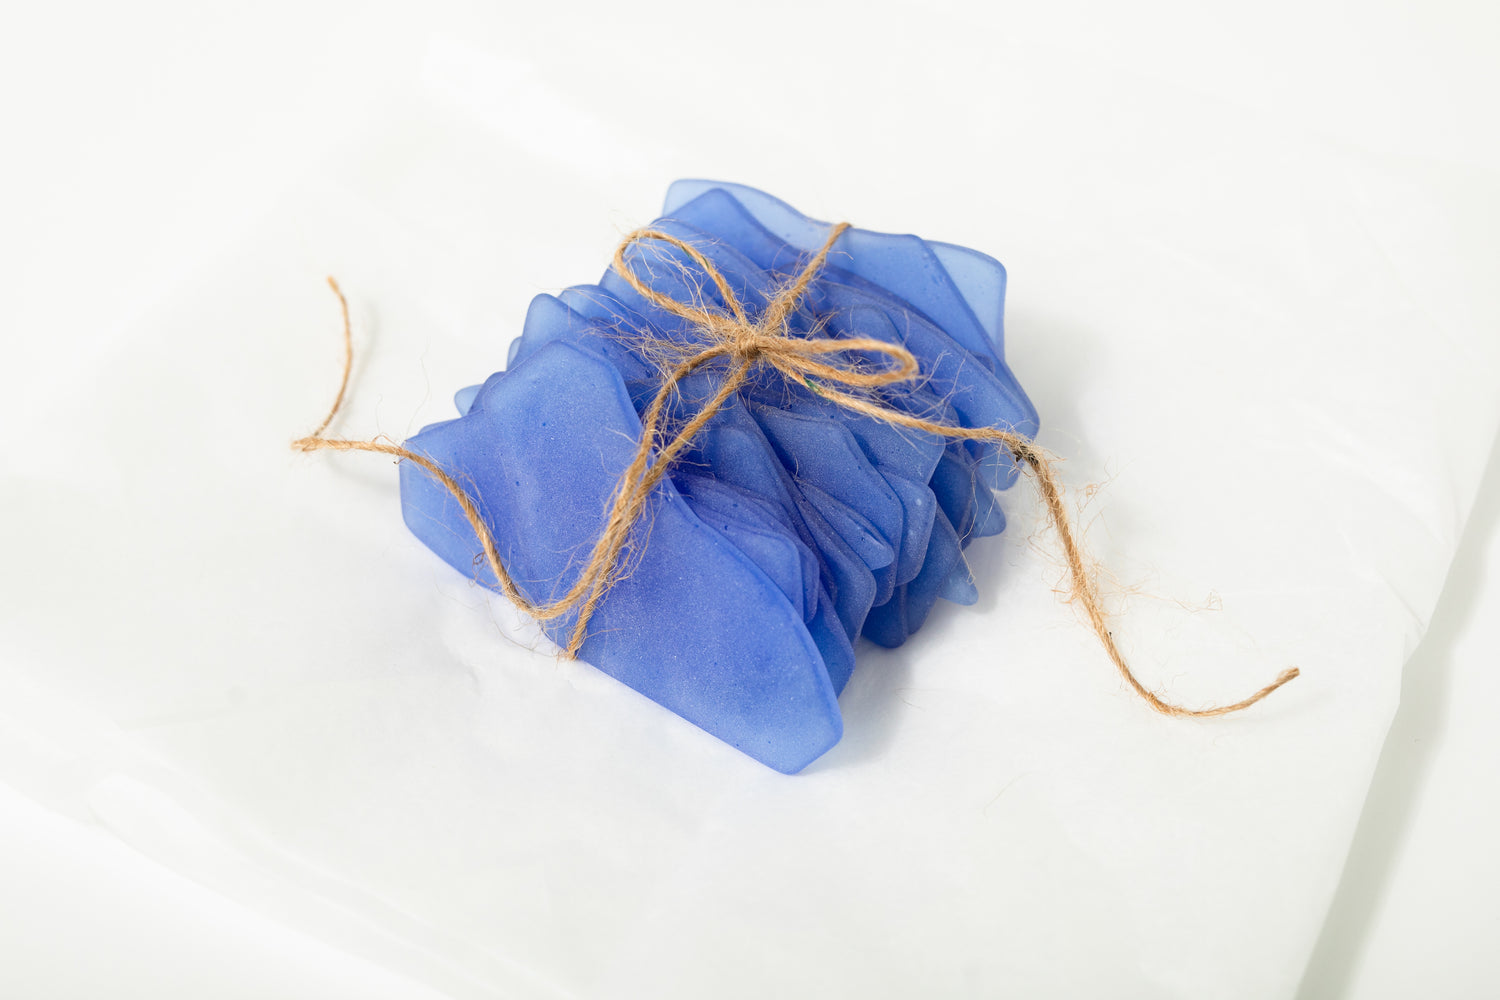 Cornflower blue sea glass place cards. Photo credit to Kinsey Holt Photography.